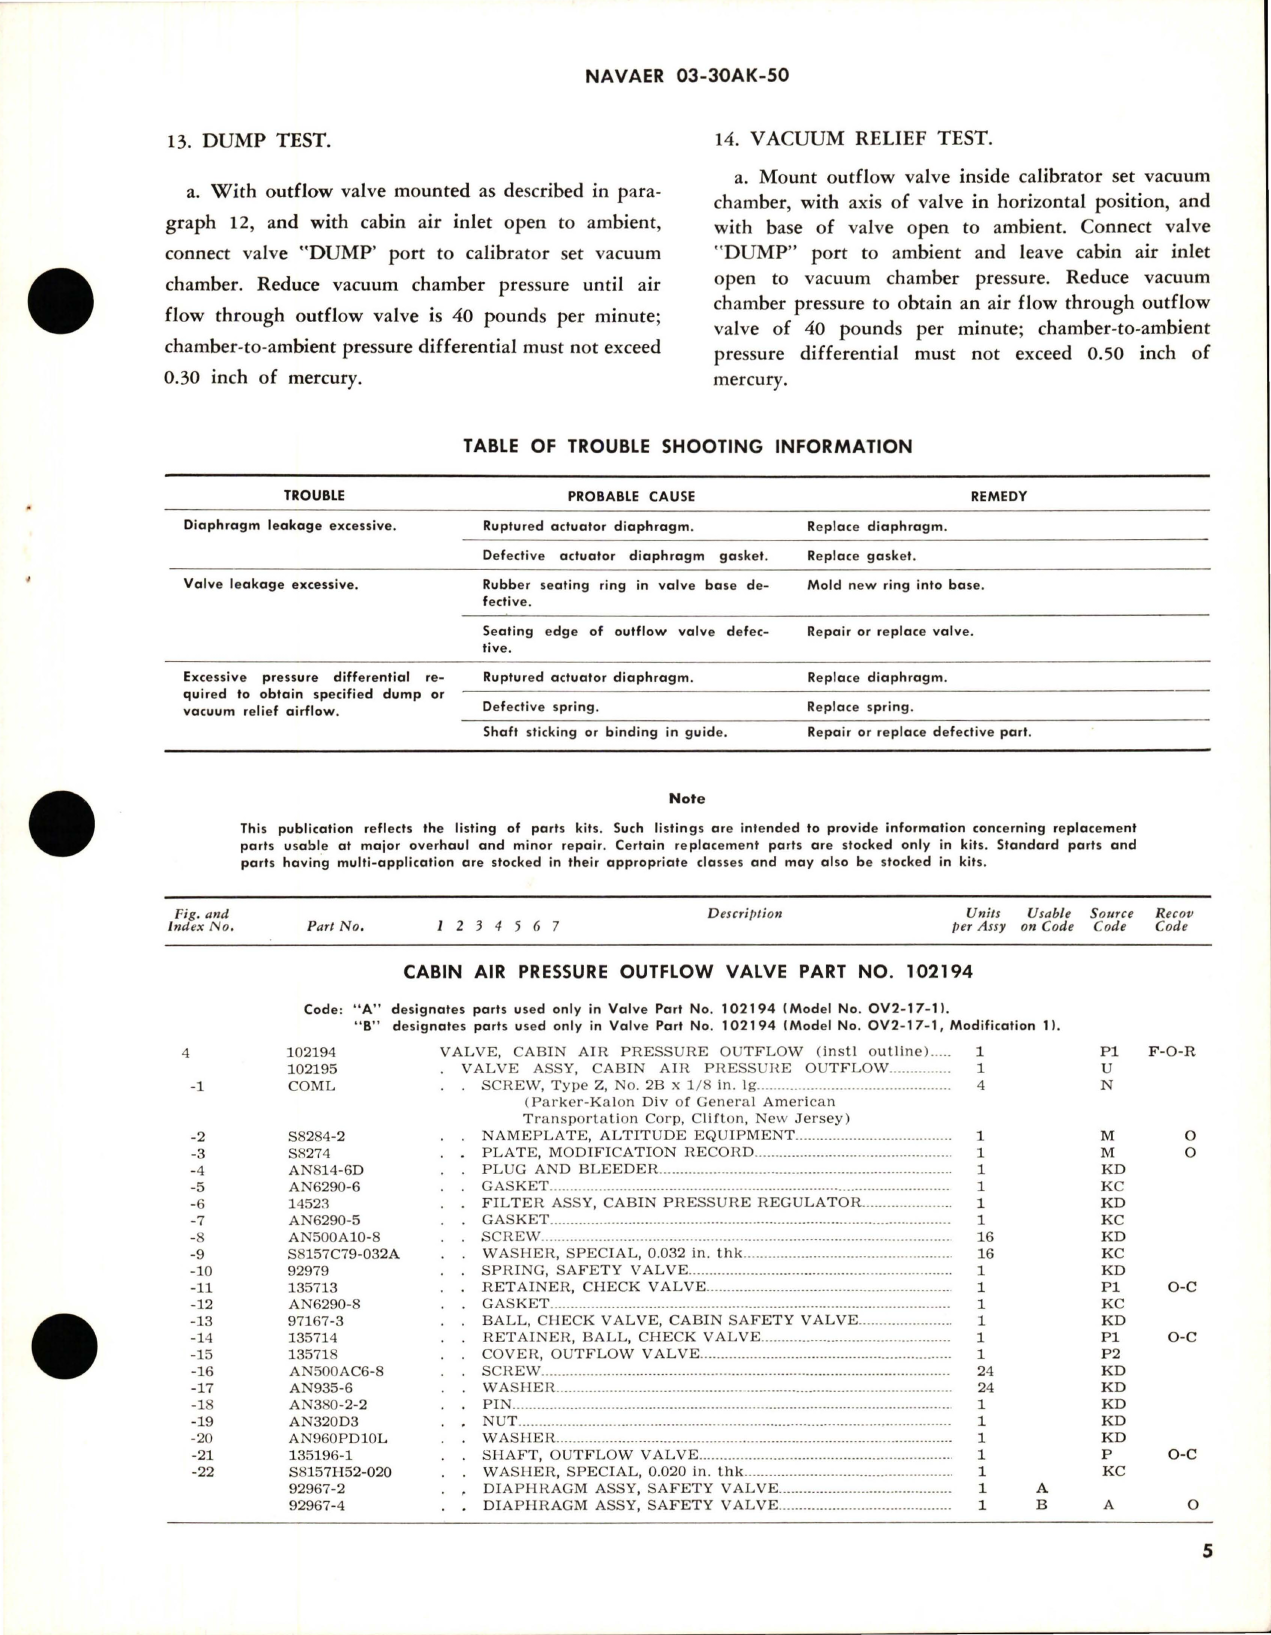 Sample page 5 from AirCorps Library document: Overhaul Instructions with Parts Breakdown for Cabin Air Pressure Outflow Valve - Part 102194 - Model OV2-17-1 